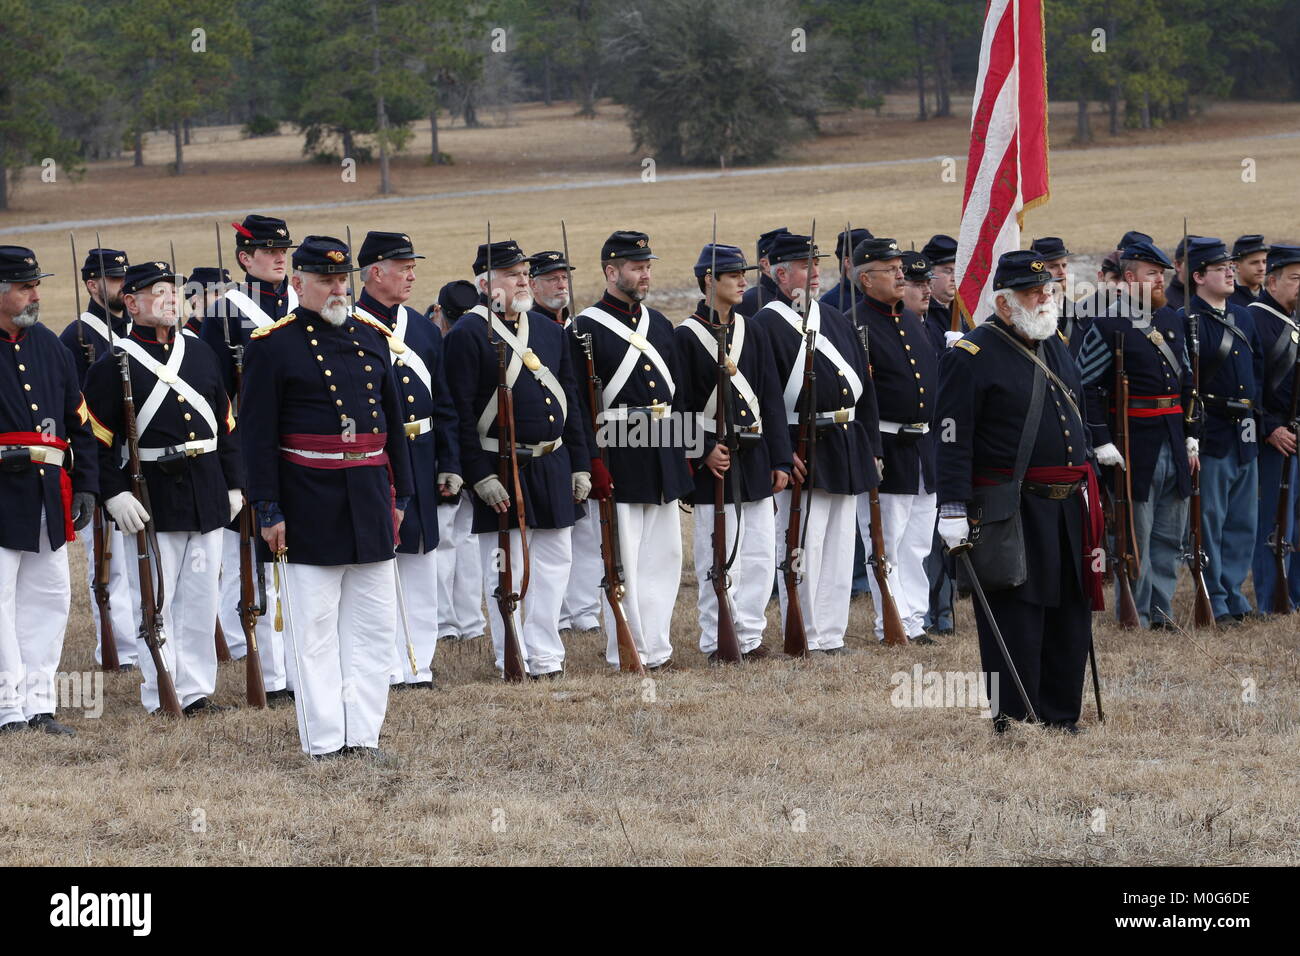 Union officer with troops at a Civil War Re-enactment of a battle that happened in Hernando County, Florida in July of l864. Stock Photo